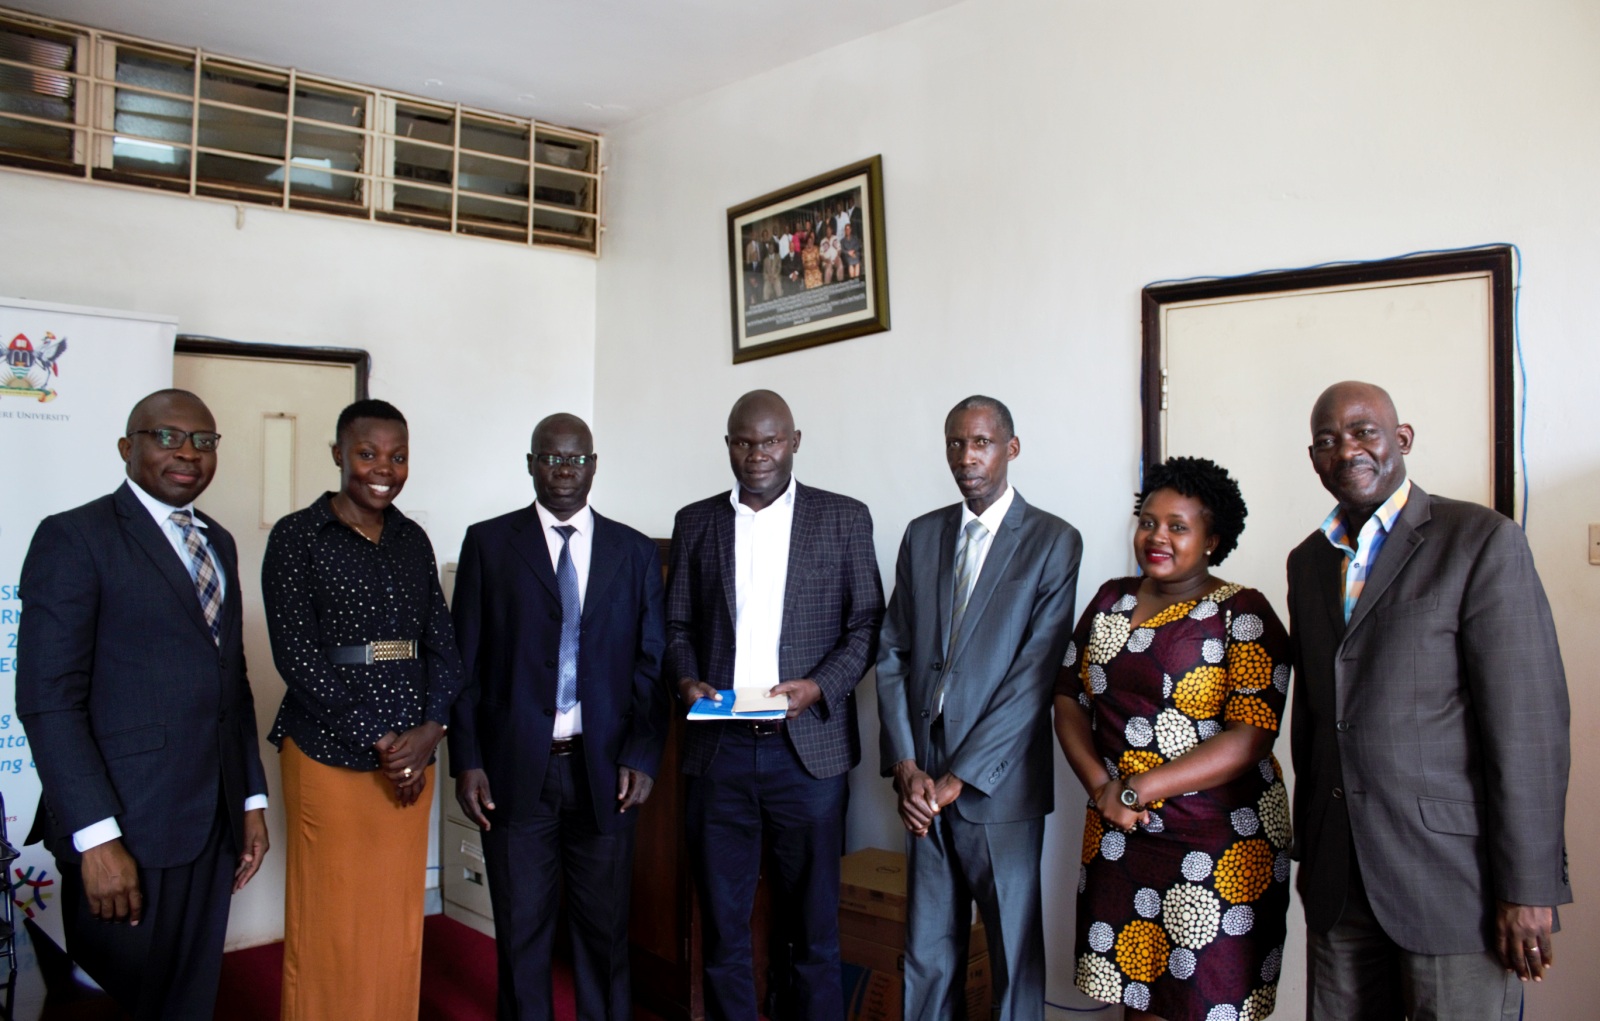 The Principal CEES-Prof. Muwagga Mugagga (3rd R), Deputy Principal CEES-Dr. Ronald Bisaso (L), outgoing Head, Department of Adult and Community Education (DACE)-Dr. Willy Ngaka (3rd L), Incoming Head, DACE-Dr. Rahman Sanya (C) and other officials at the handover ceremony on 30th June 2022, Makerere University.